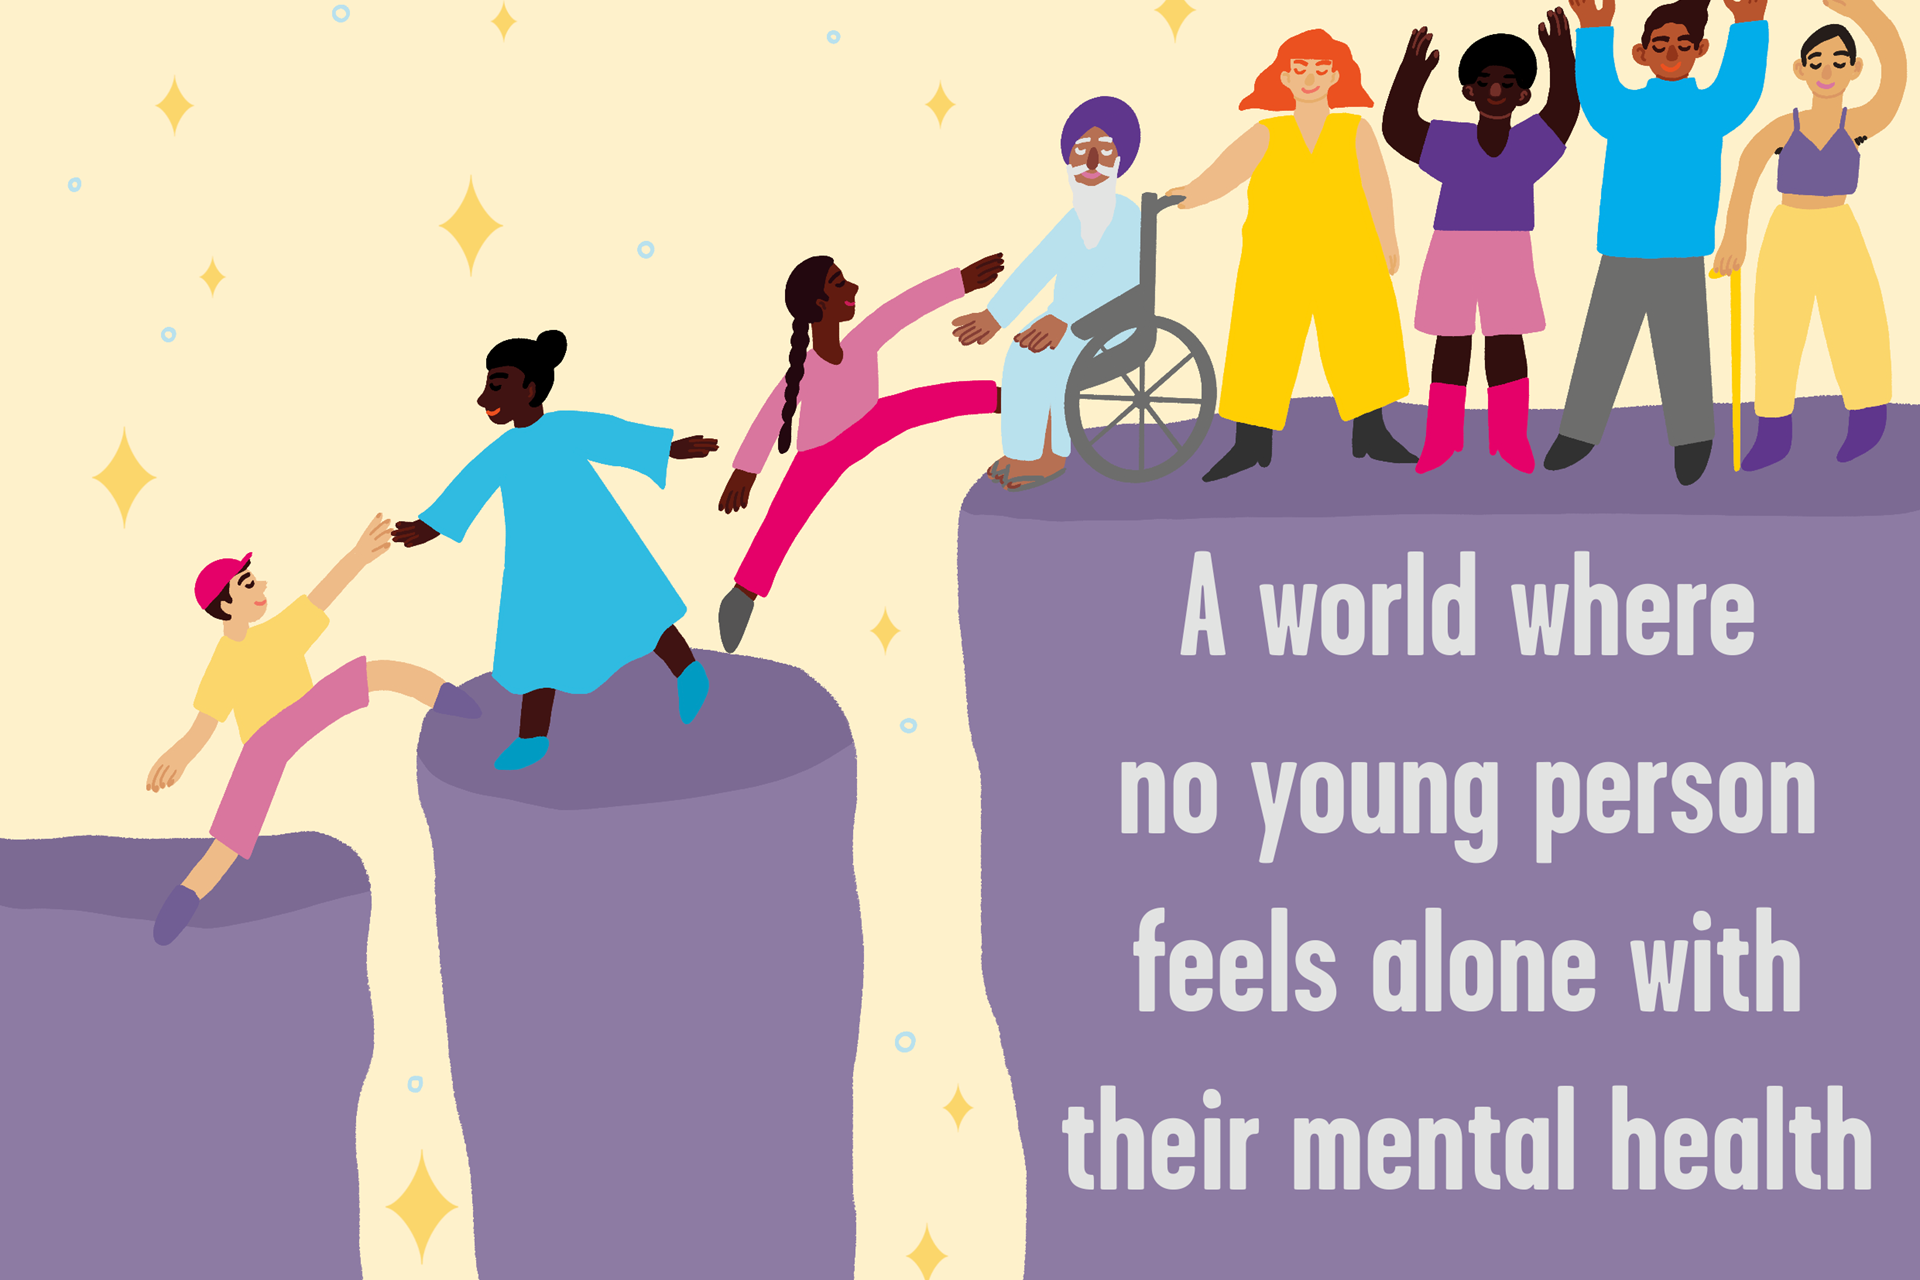 A group of people at the top of a purple block are helping three others climb onto their block. The text on the big purple block reads 'a world where no young person feels alone with their mental health'.